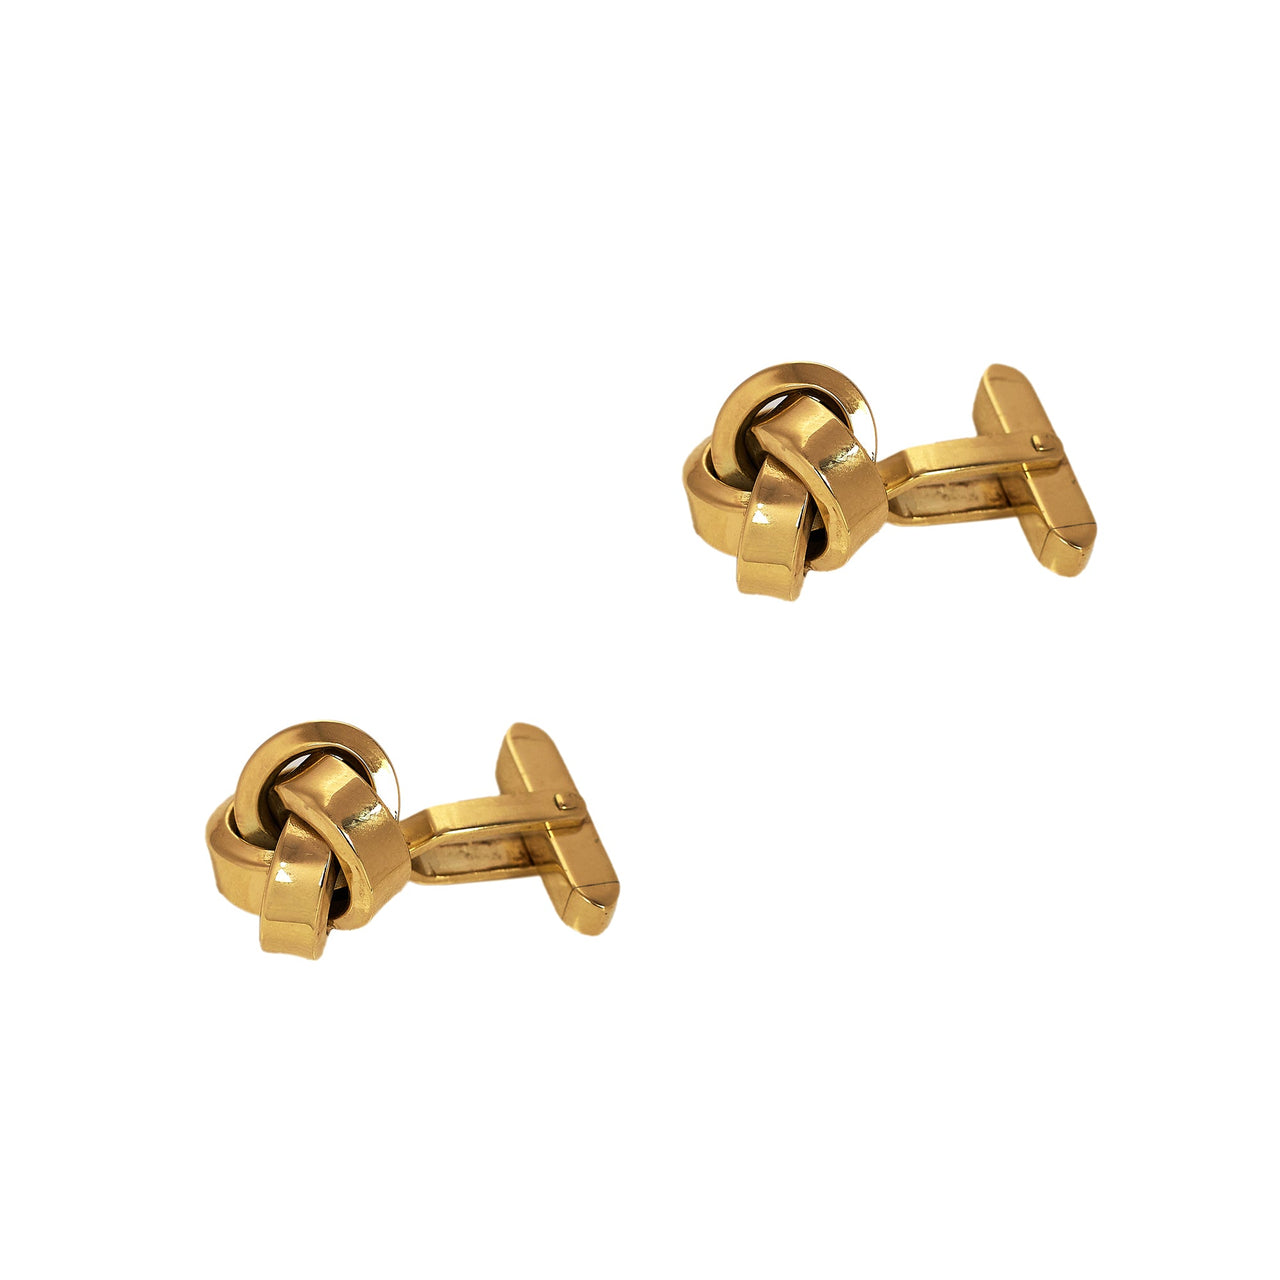 Pre-Owned 14ct Yellow Gold Knot Design Cufflinks